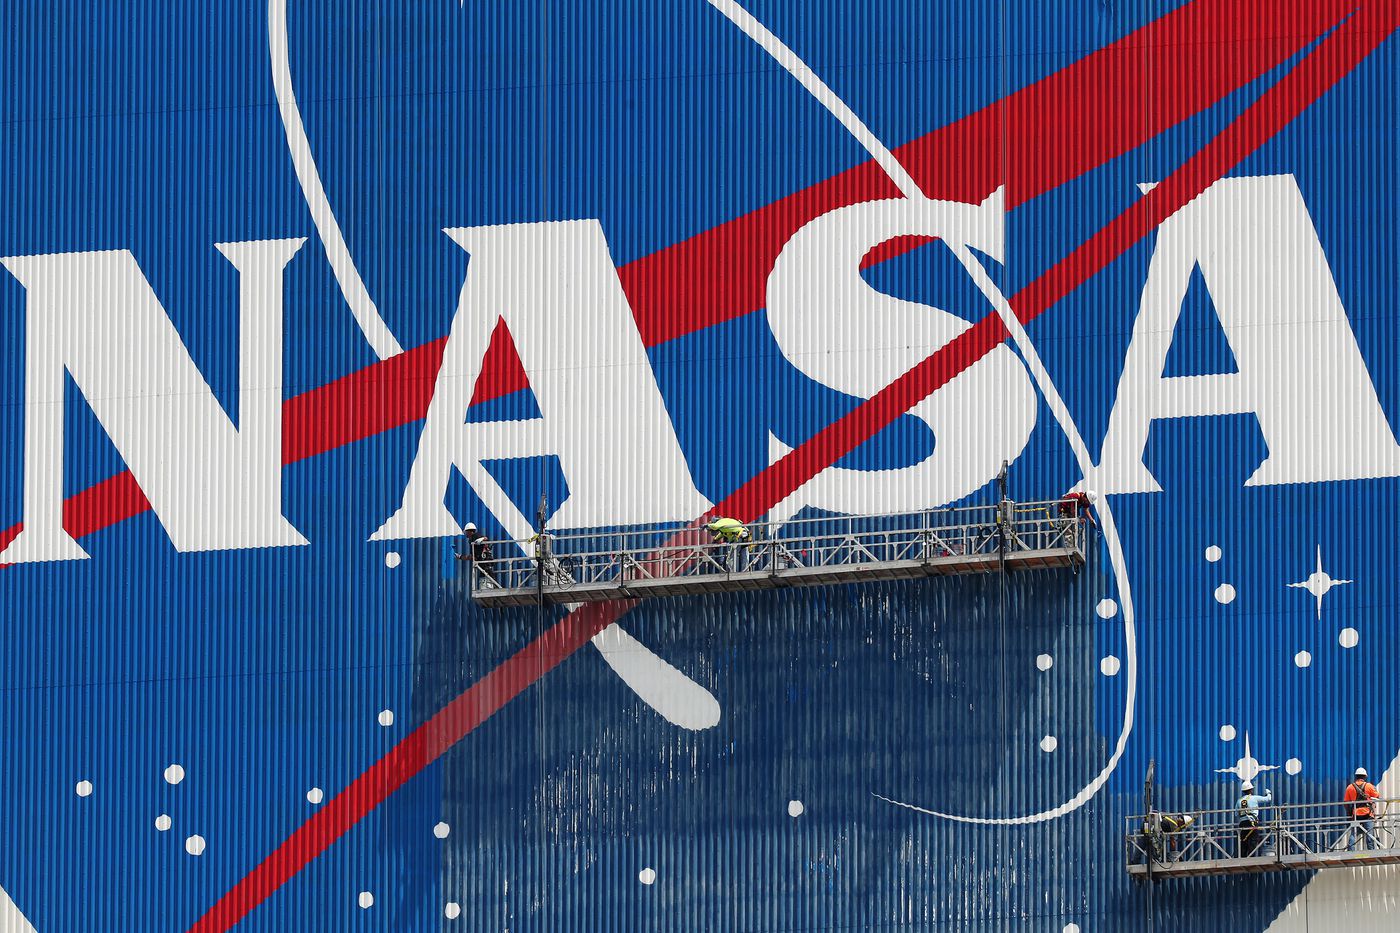 At key points in human space, NASA’s main restructuring took place